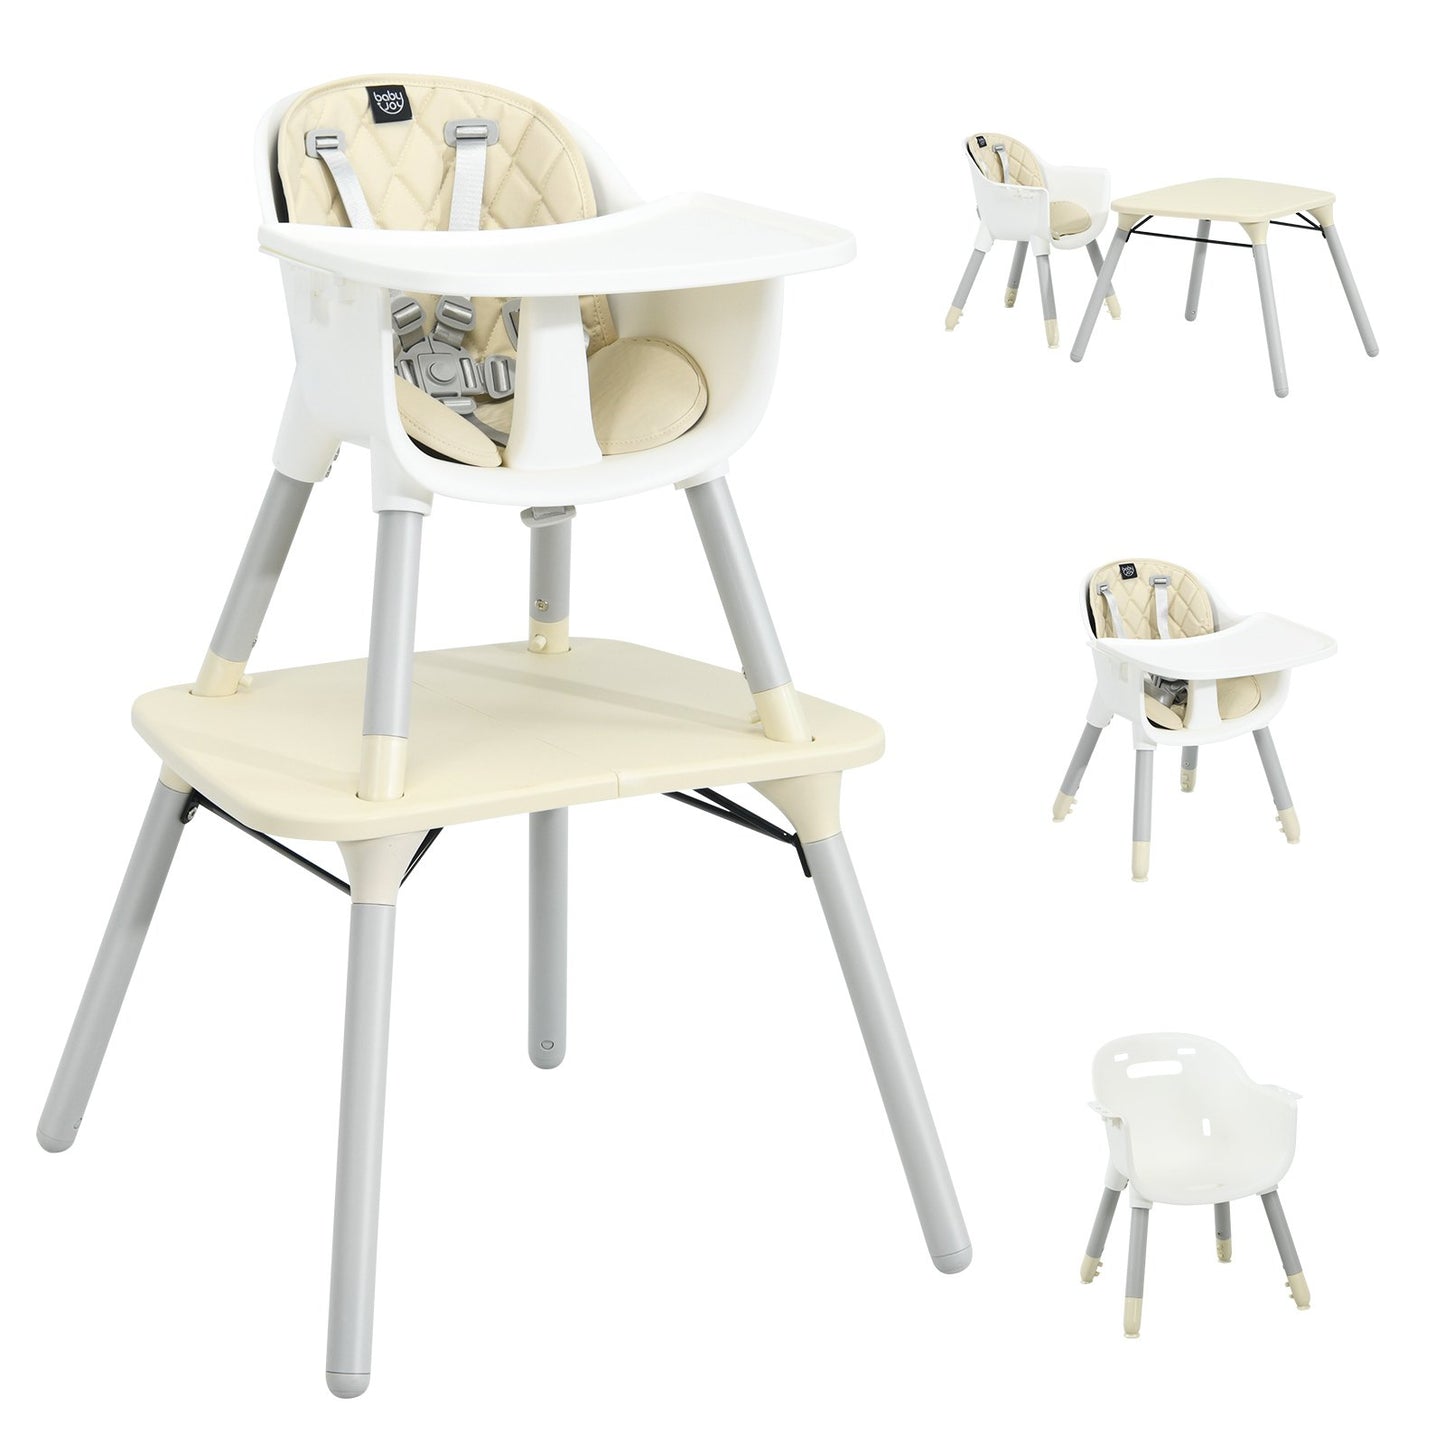 4-in-1 Baby Convertible Toddler Table Chair Set with PU Cushion, Beige